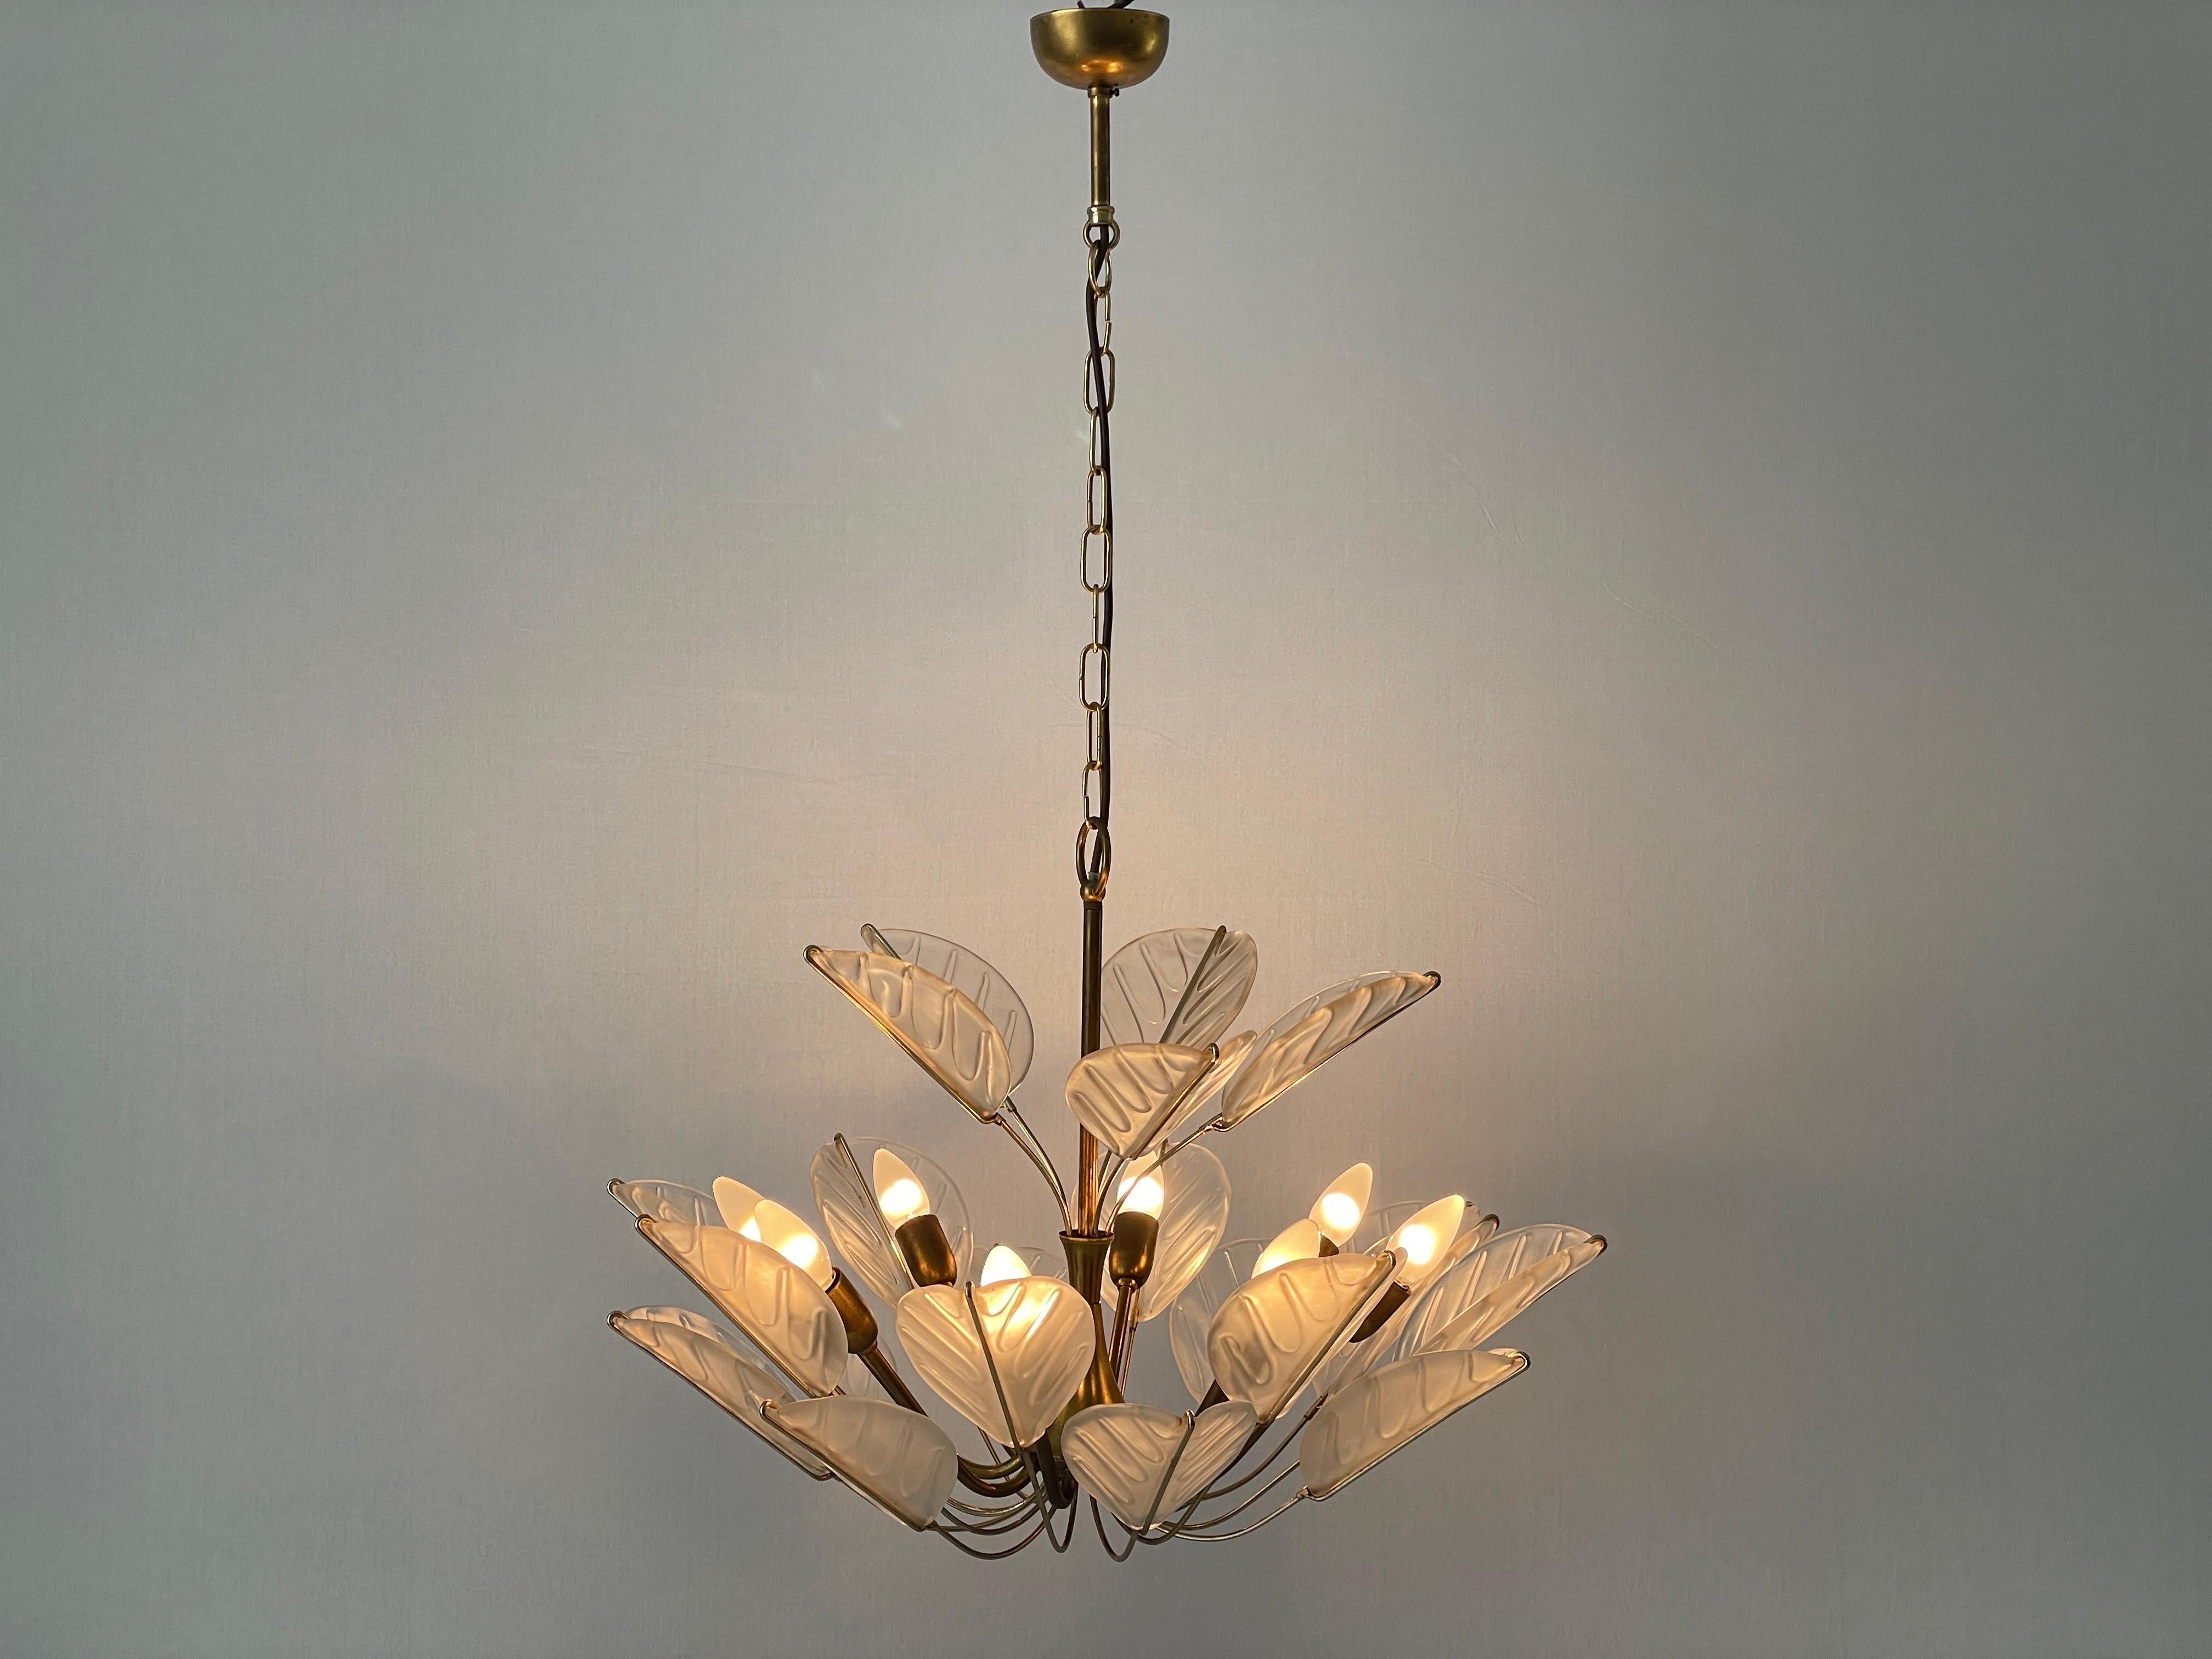 Luxurious 8-armed Brass Chandelier with Crystal Glass Leaves, 1960s, Germany For Sale 10